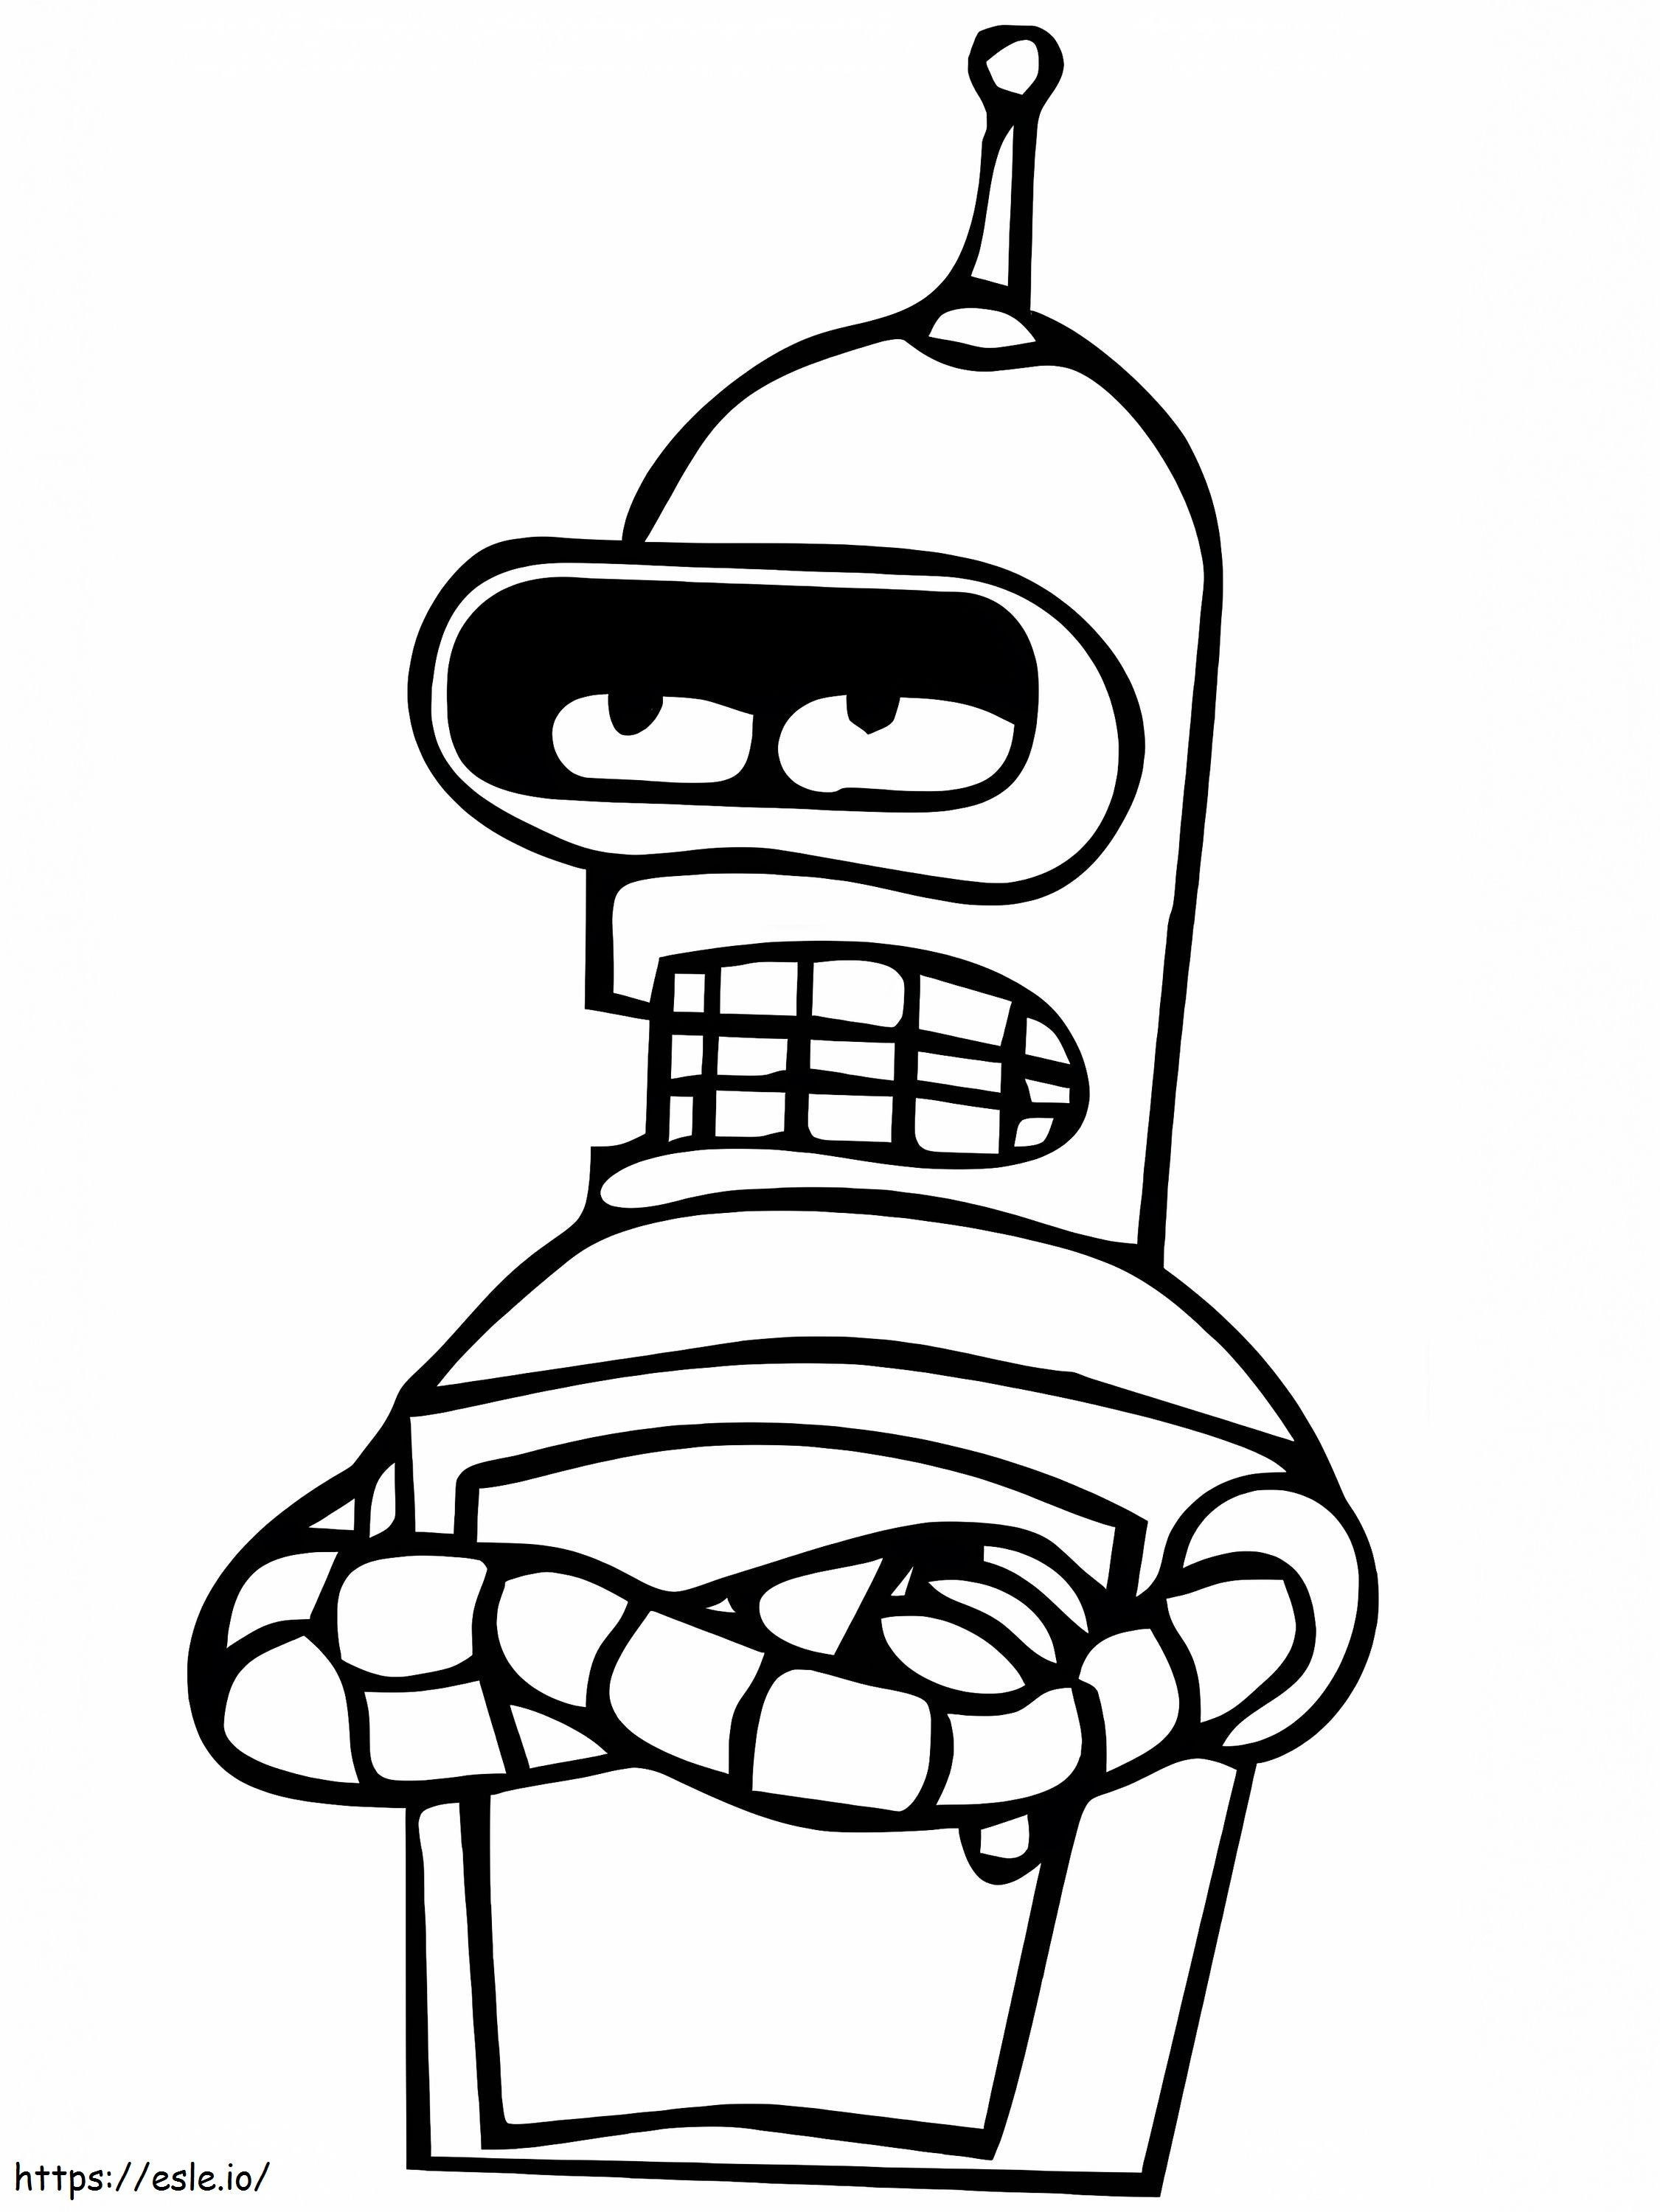 Bender 4 coloring page